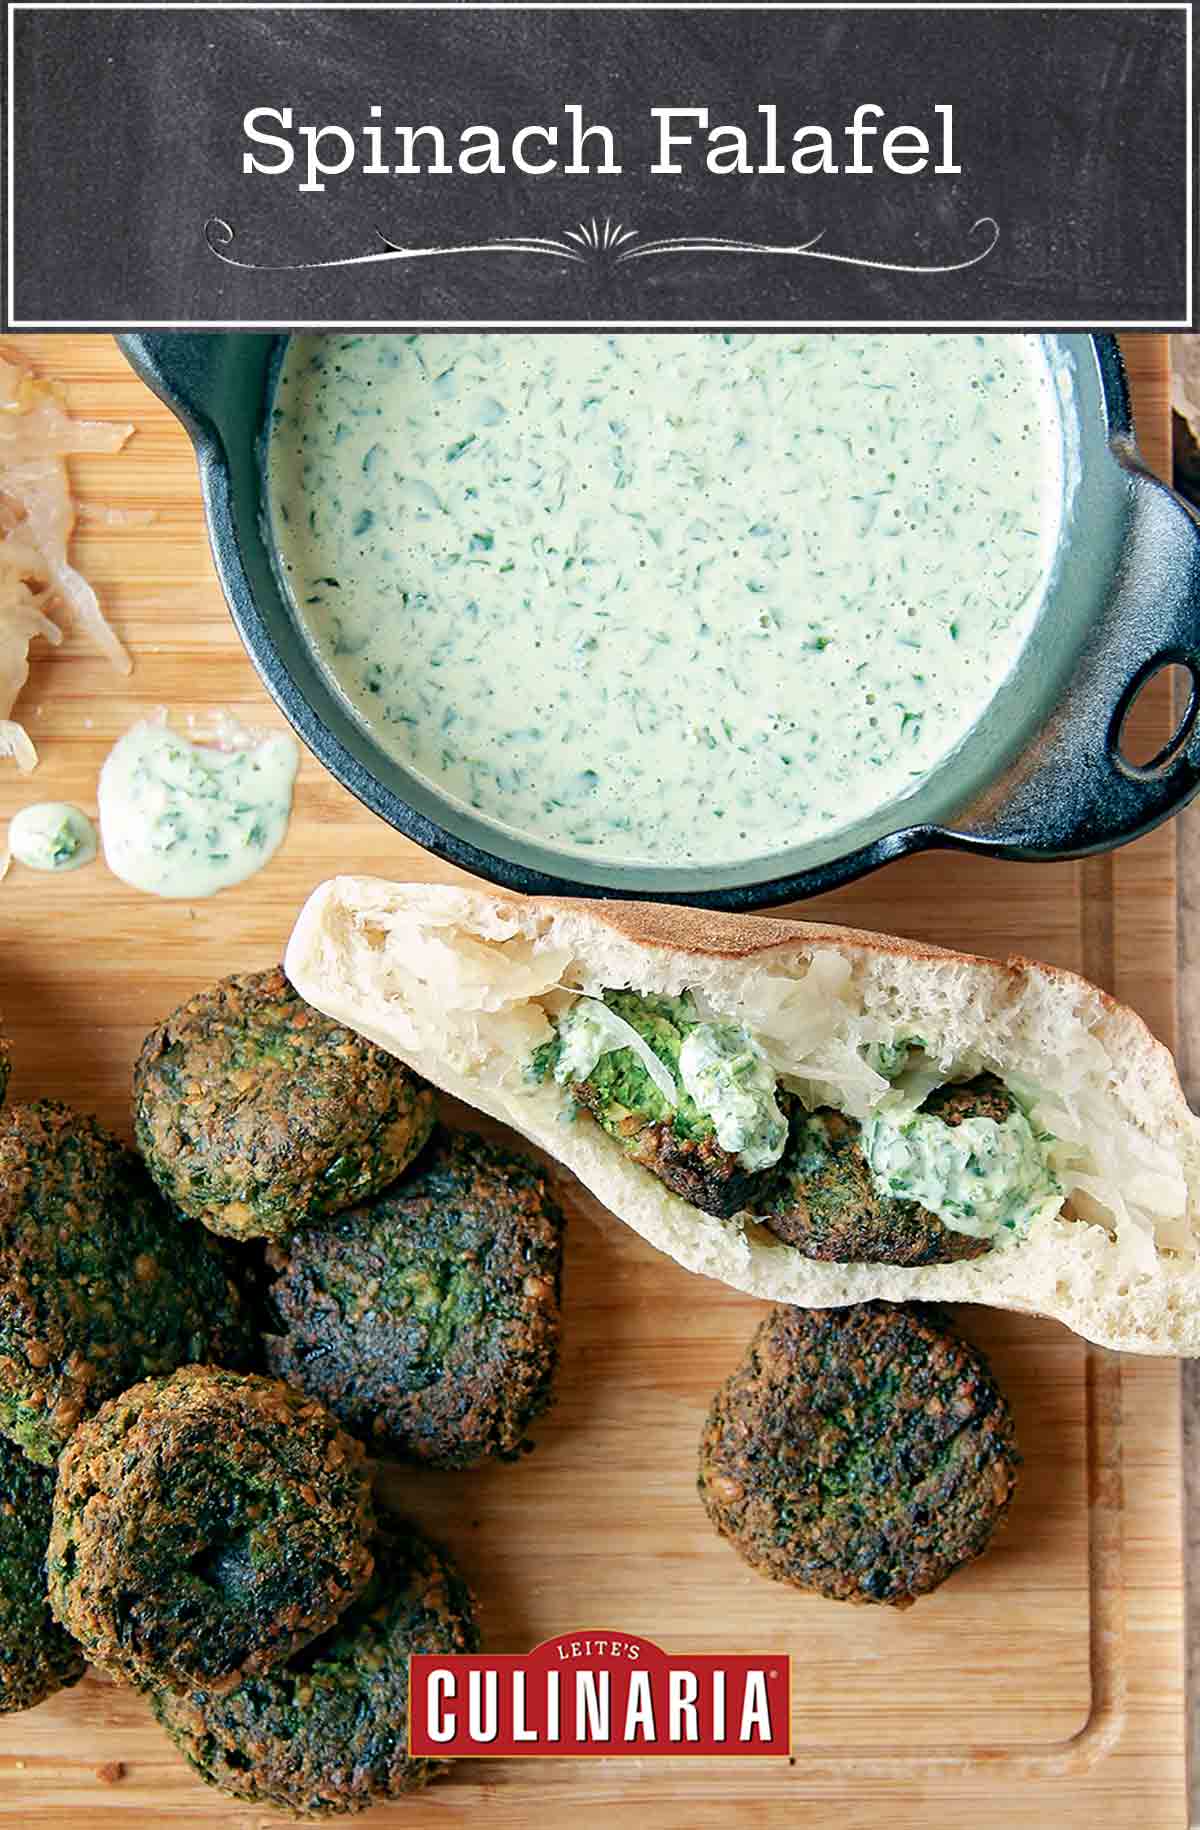 My Little Chickpea Smoked Chipotle Chickpea Falafel With 